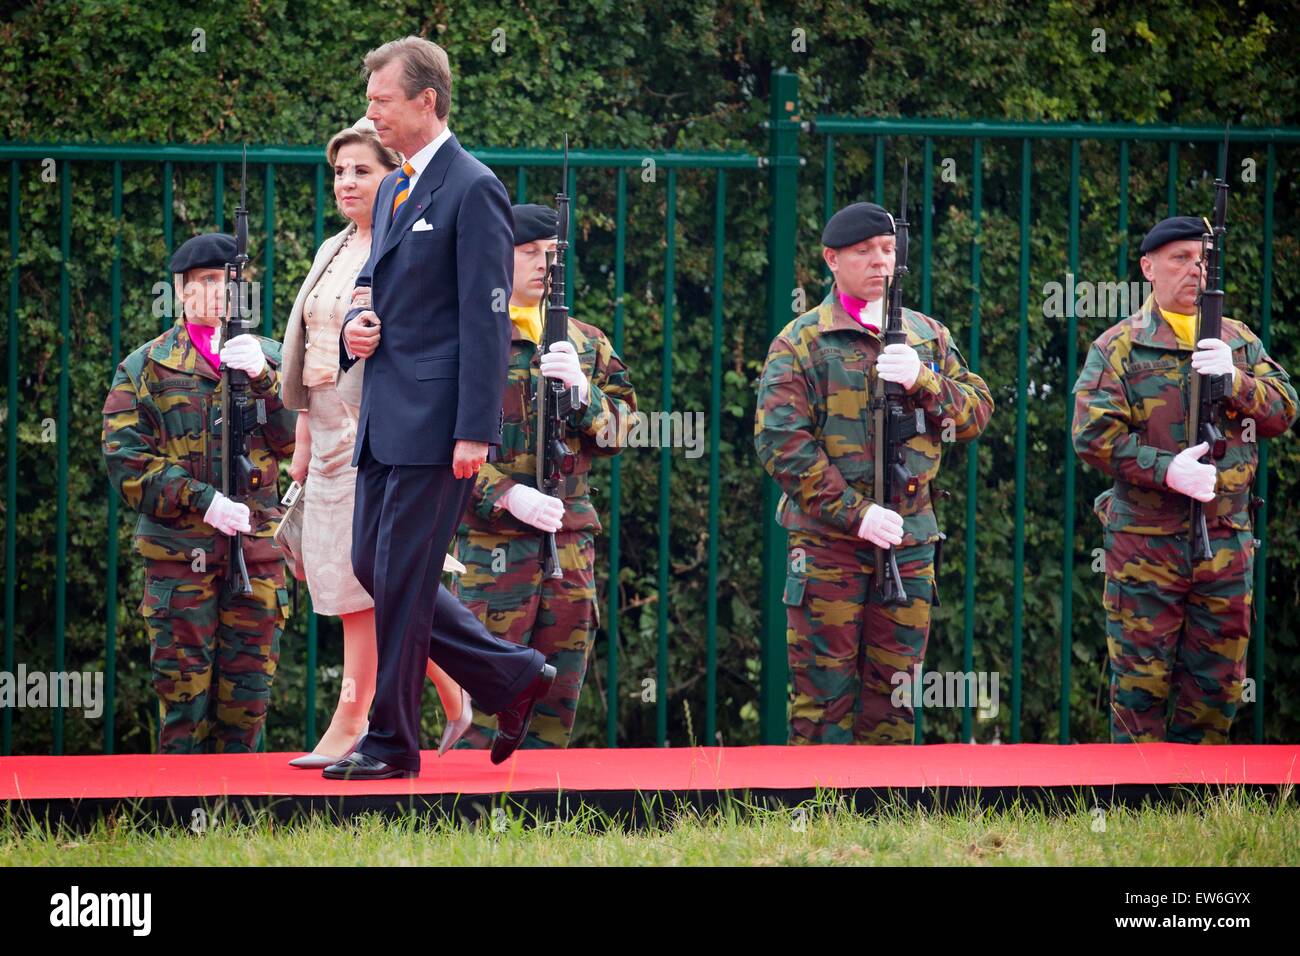 Grand Duke Henri and Grand Duchess Maria Teresa of Luxembourg during the official celebration as part of the bicentennial celebrations for the Battle of Waterloo, Belgium 18 June 2015. On 19 and 20 June 2015, some 5000 re-enactors, 300 horses and 100 cano Stock Photo